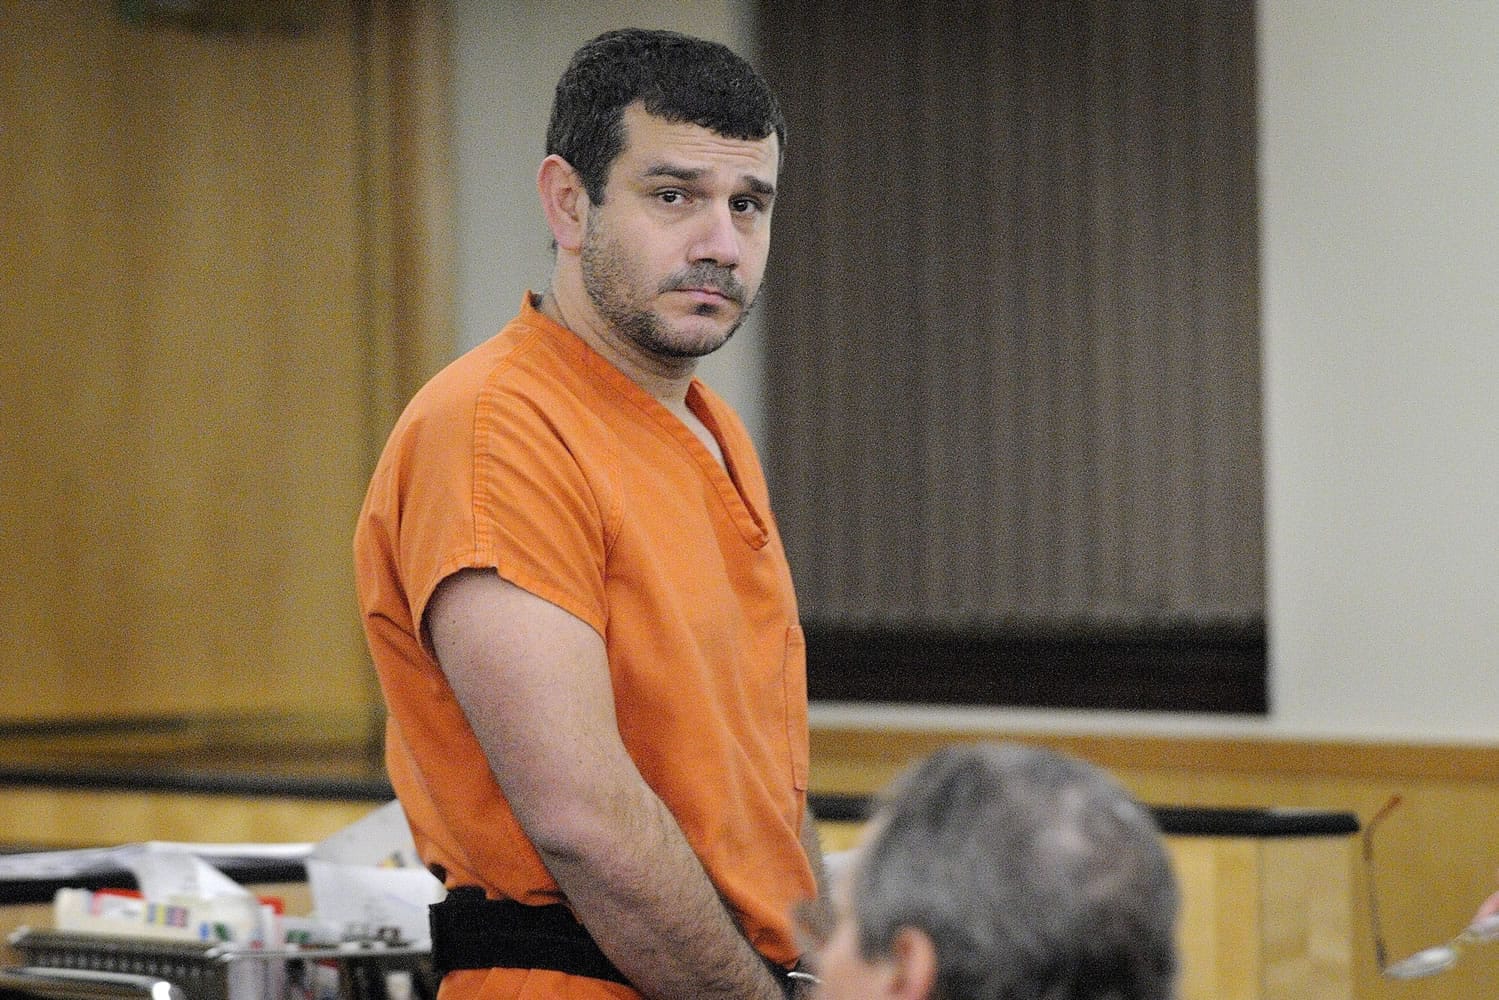 Alexey Perez Hernandez shown during a 2009 court appearance in Clark County.